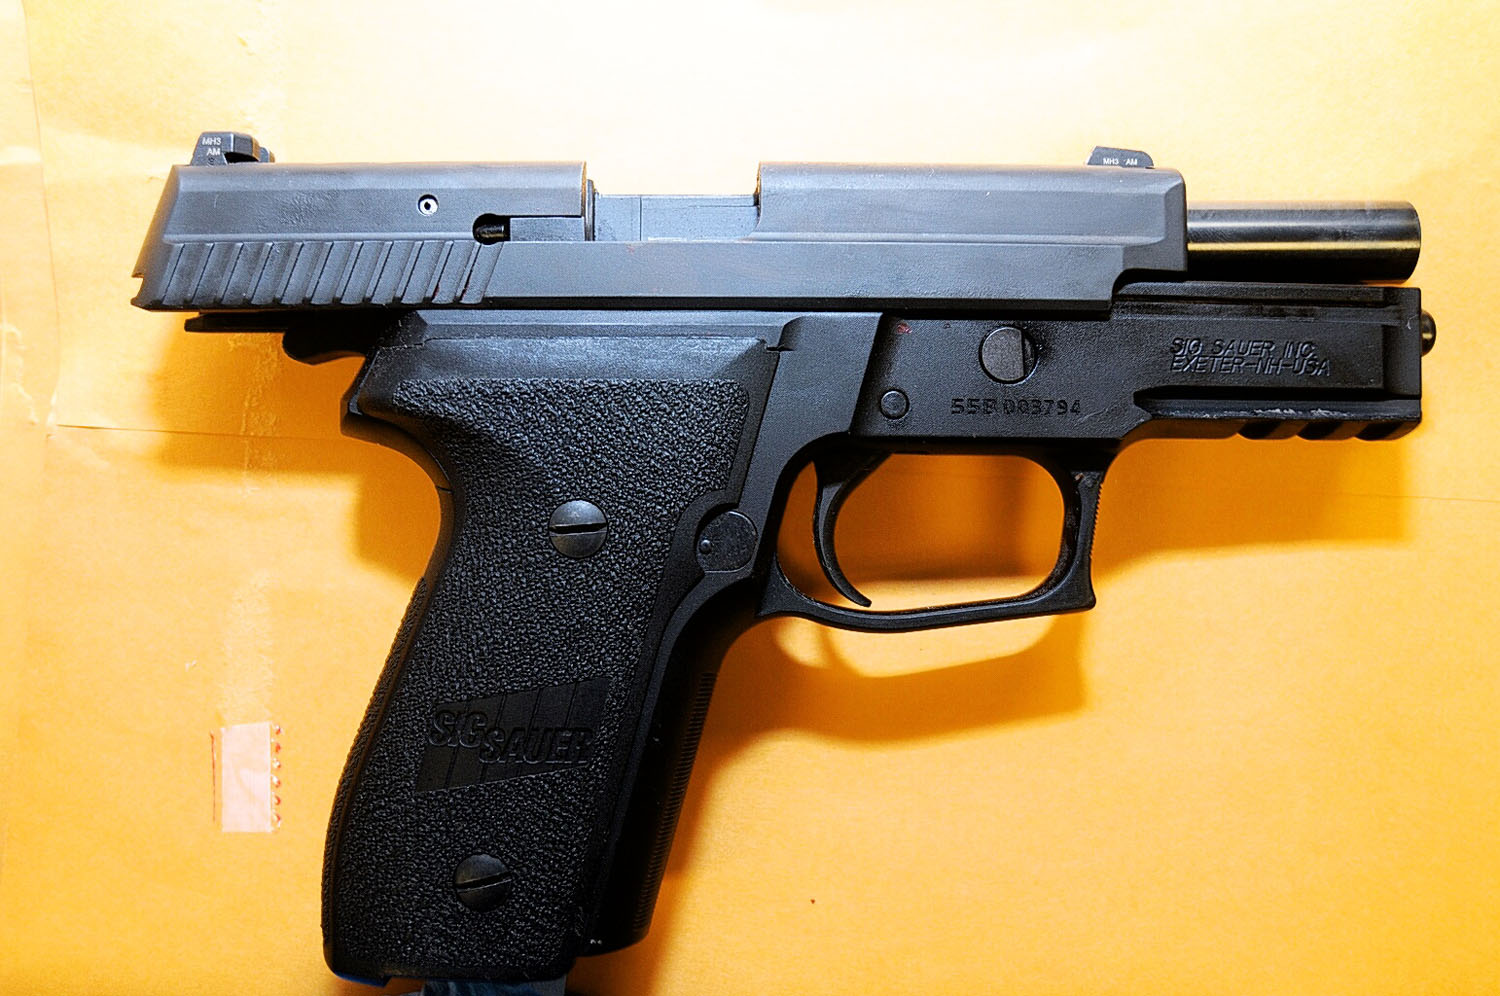 An undated evidence photograph made available by the St. Louis County prosecutors office on Nov. 25, 2014 shows Ferguson police officer Darren Wilson's weapon taken after the shooting of Michael Brown.